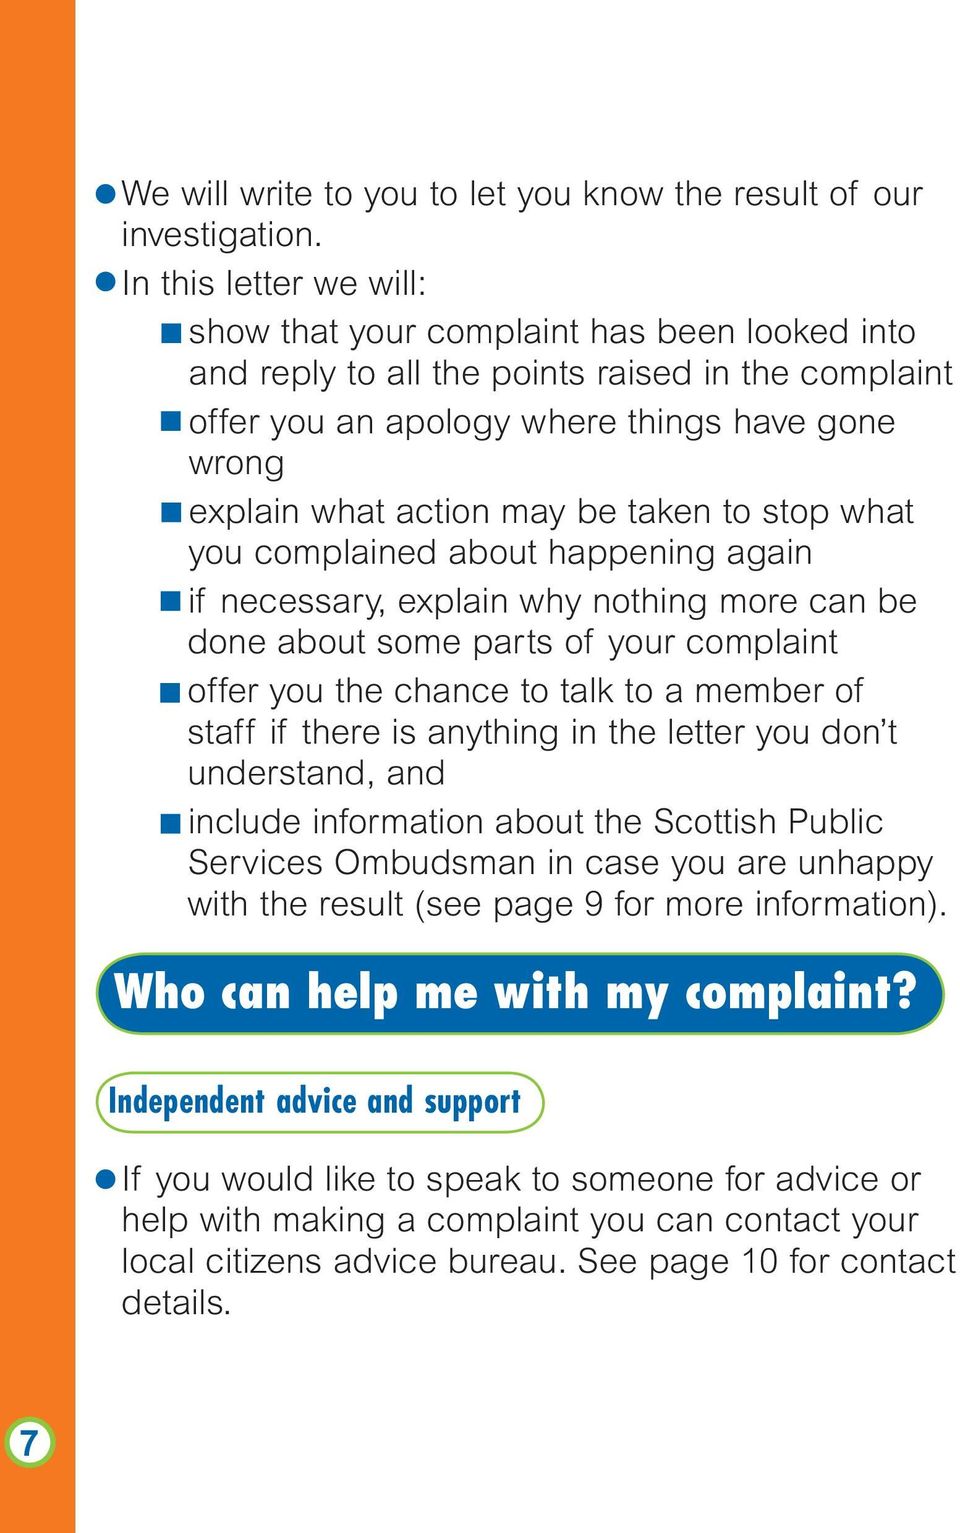 taken to stop what you complained about happening again if necessary, explain why nothing more can be done about some parts of your complaint offer you the chance to talk to a member of staff if